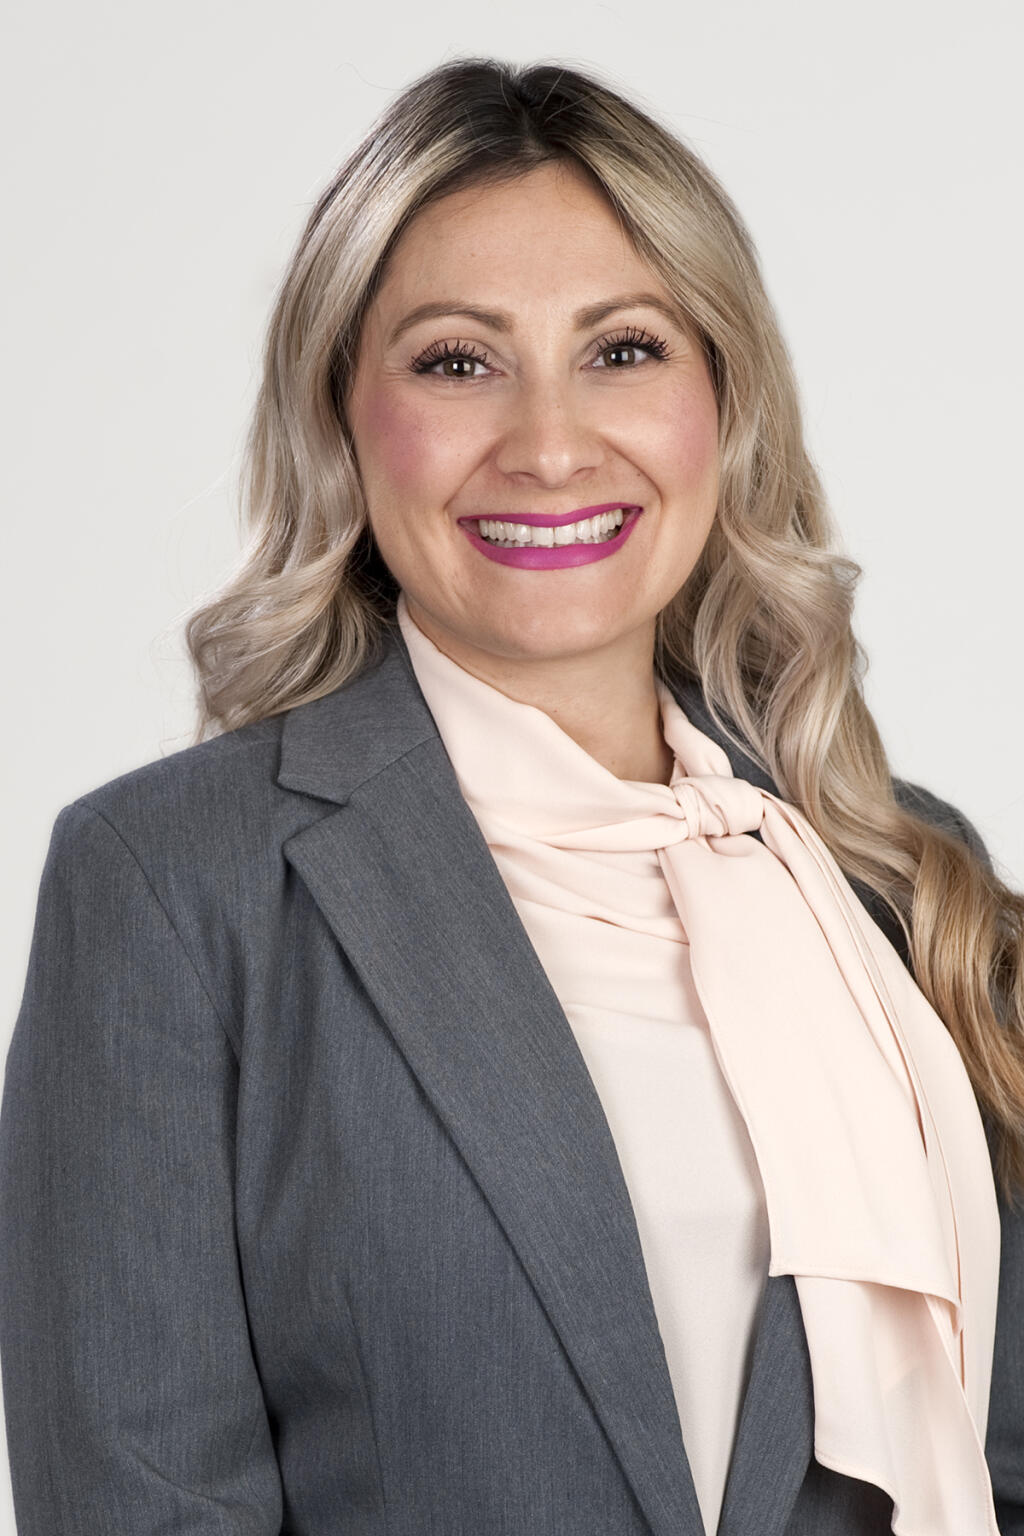 Gladys Milligan, 39, branch experience manager, Redwood Credit Union, American Canyon, is a North Bay Business Journal 2021 Forty Under 40 winner.